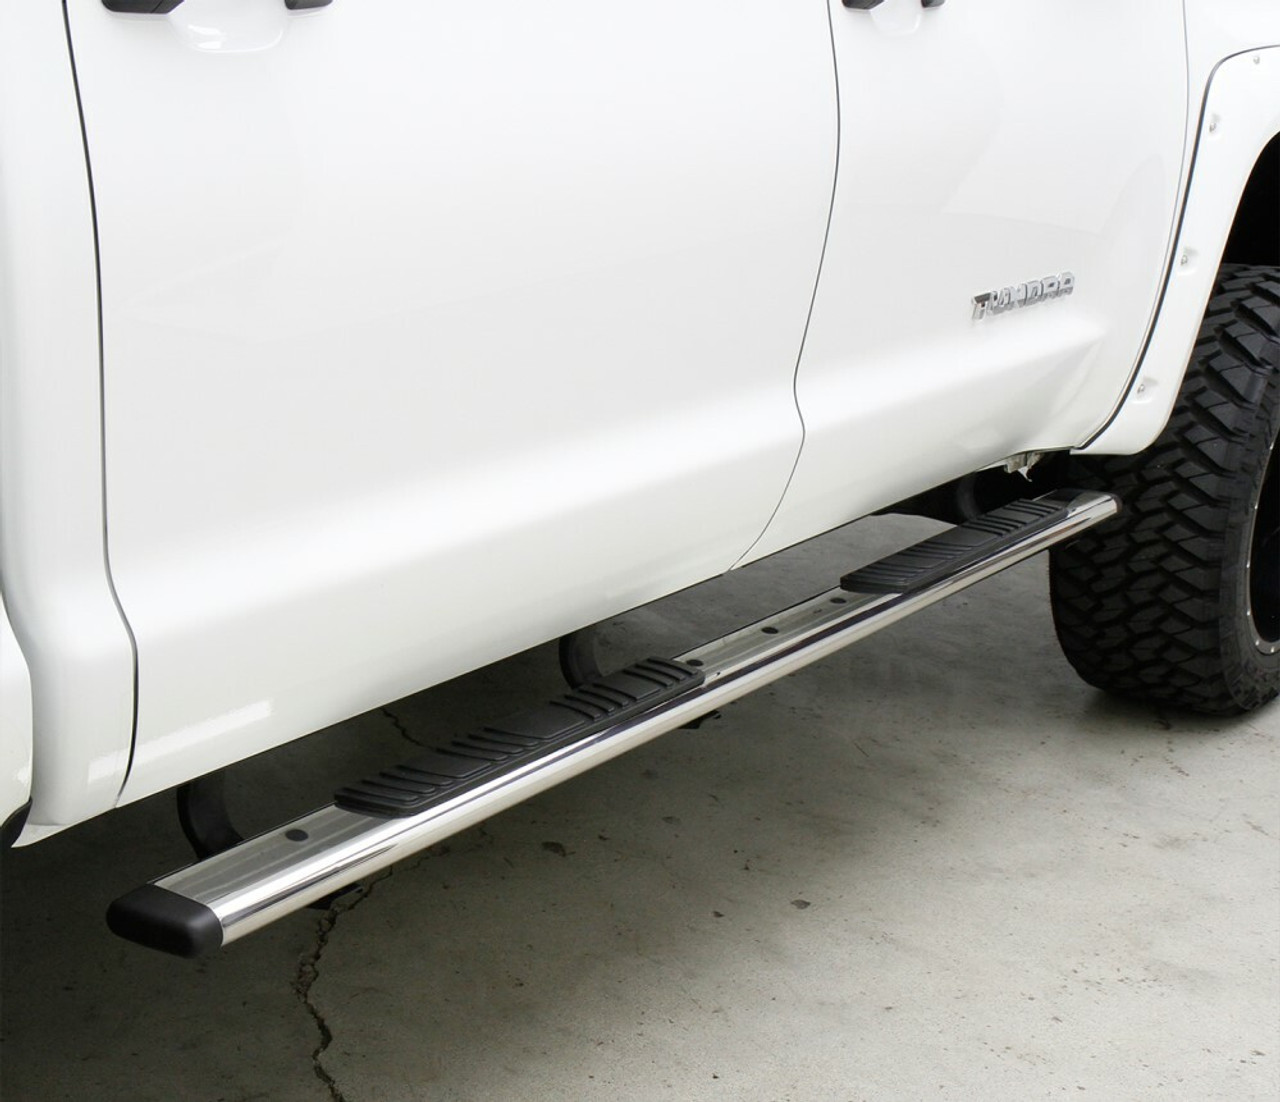 Go Rhino 685415587T Ford, F-150, 2015 - 2021, 5 inch OE Xtreme Low Profile - Complete Kit: Sidesteps + Brackets, Galvanized Steel, Textured black, 650087T side bars + 6841555 OE Xtreme Brackets. 5 inch wide x 87 inch long side bars